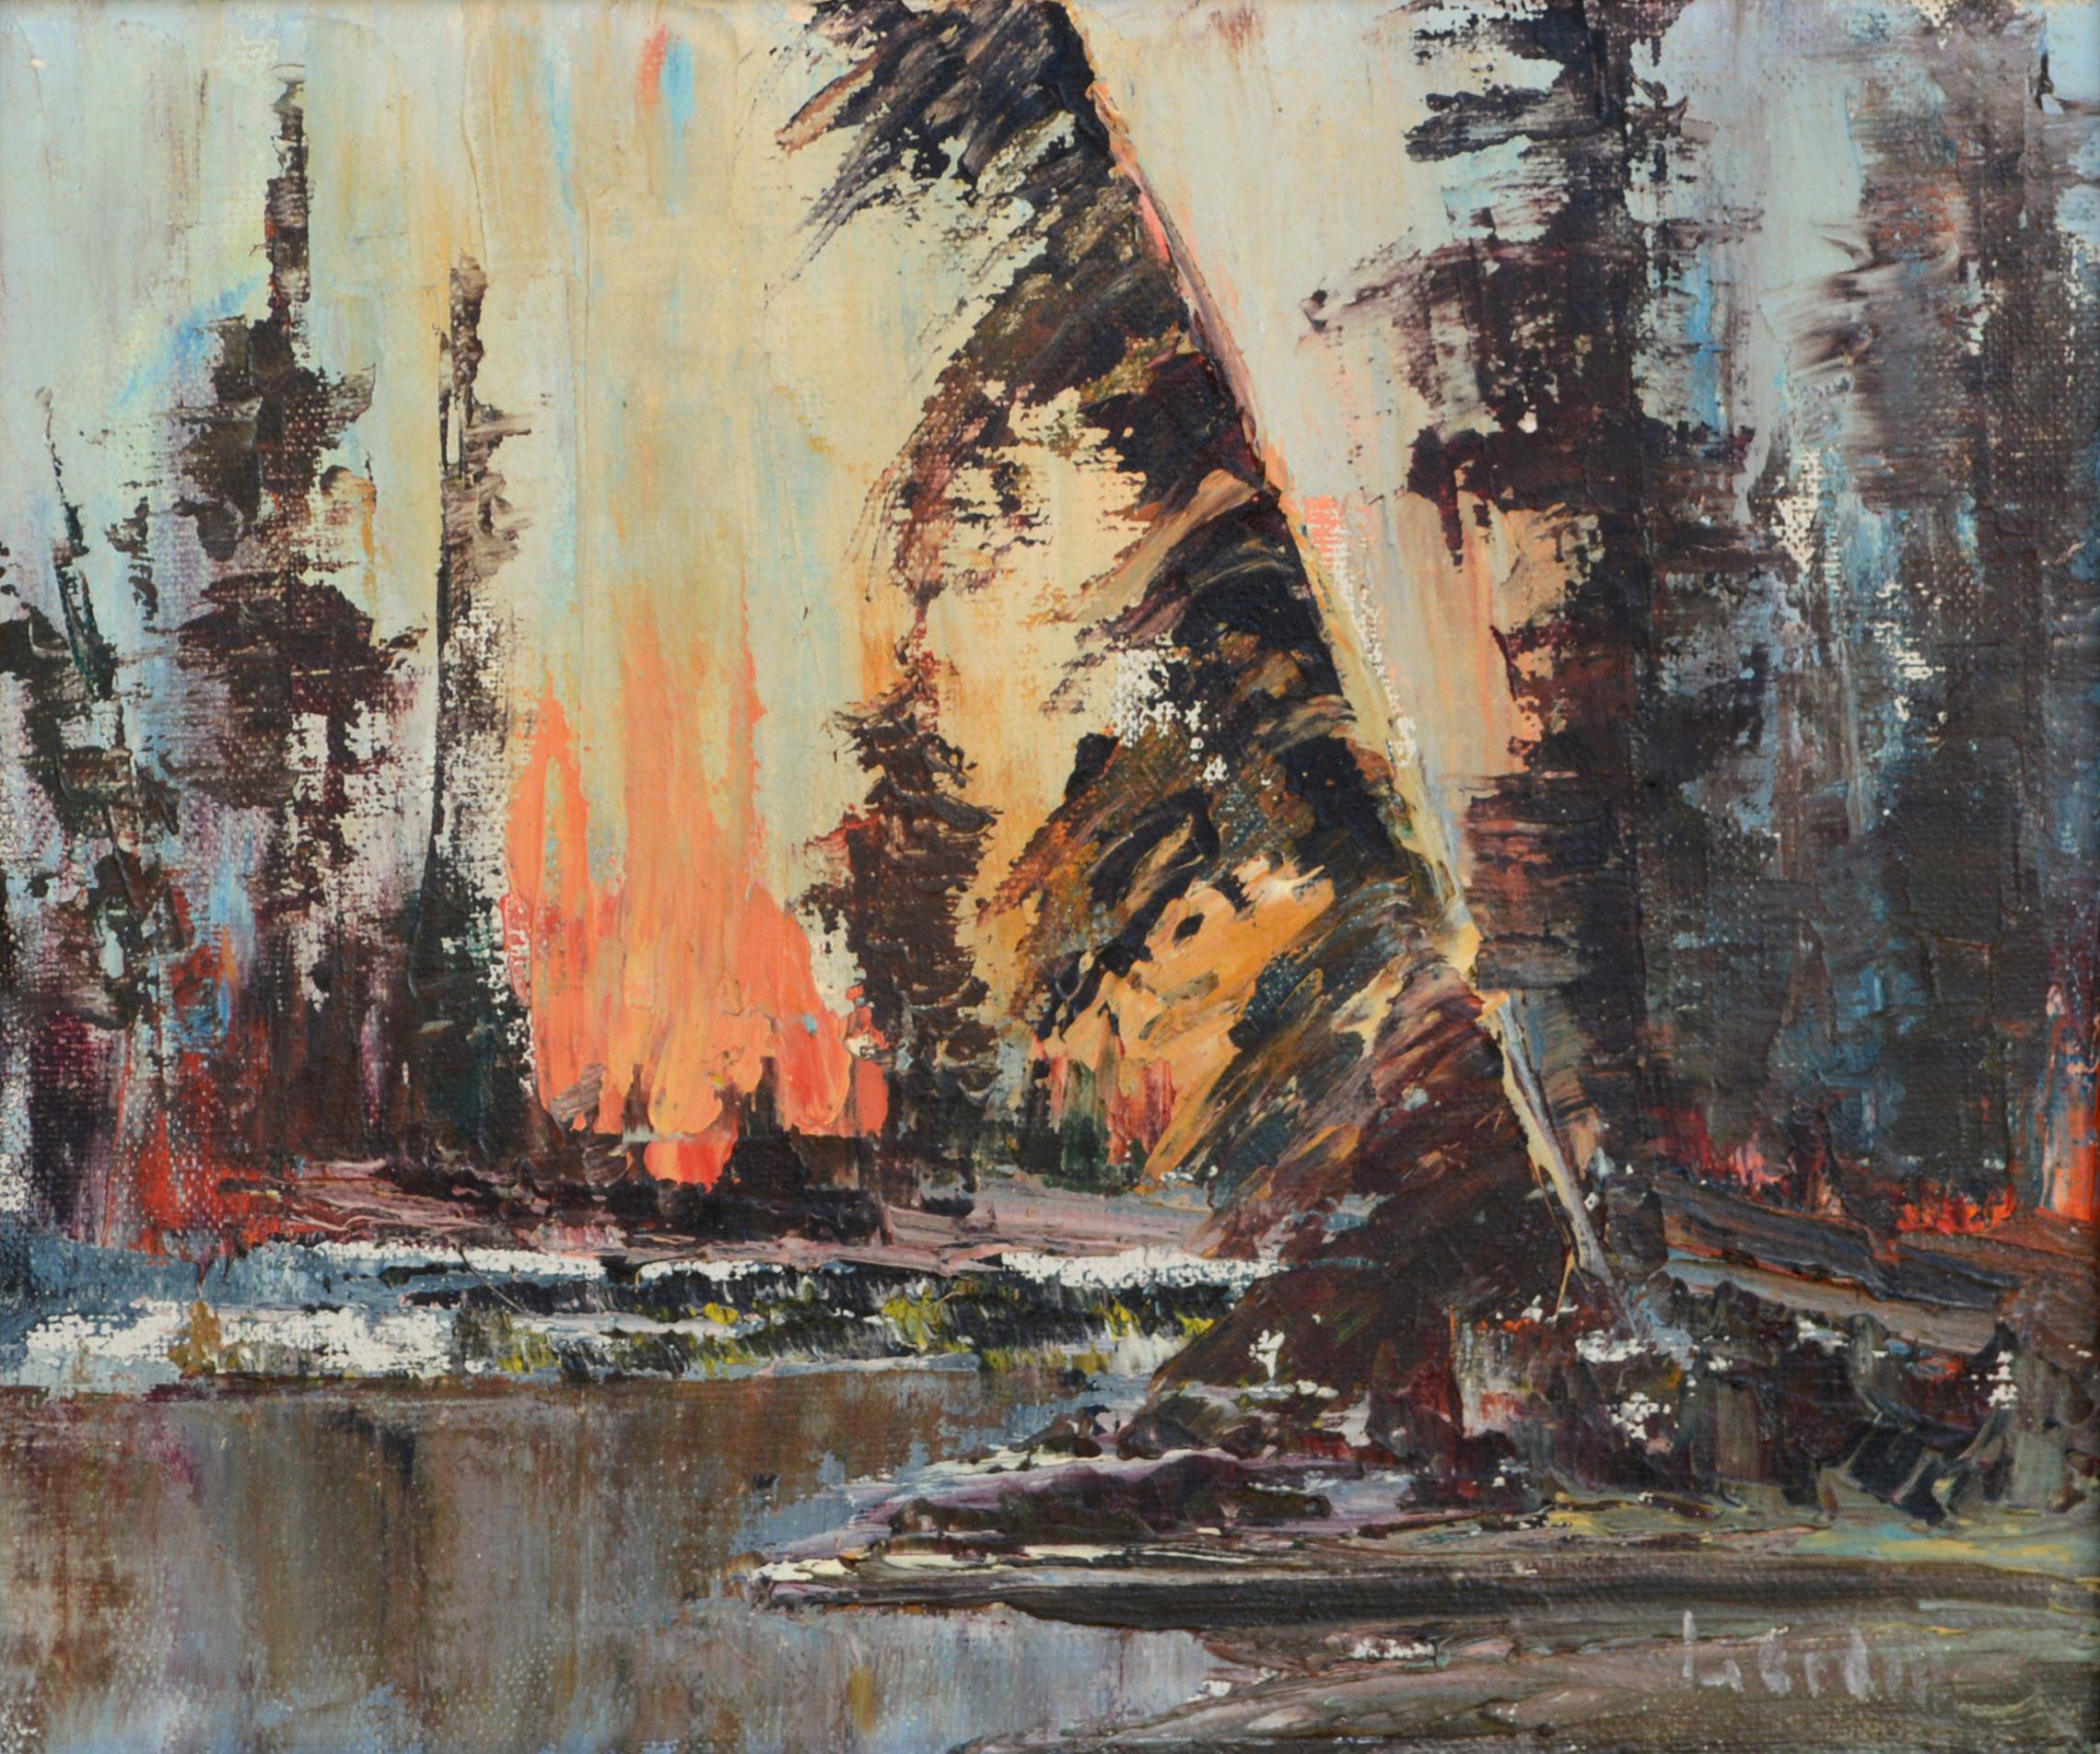 The Approaching Fire - Landscape - Painting by Gordon